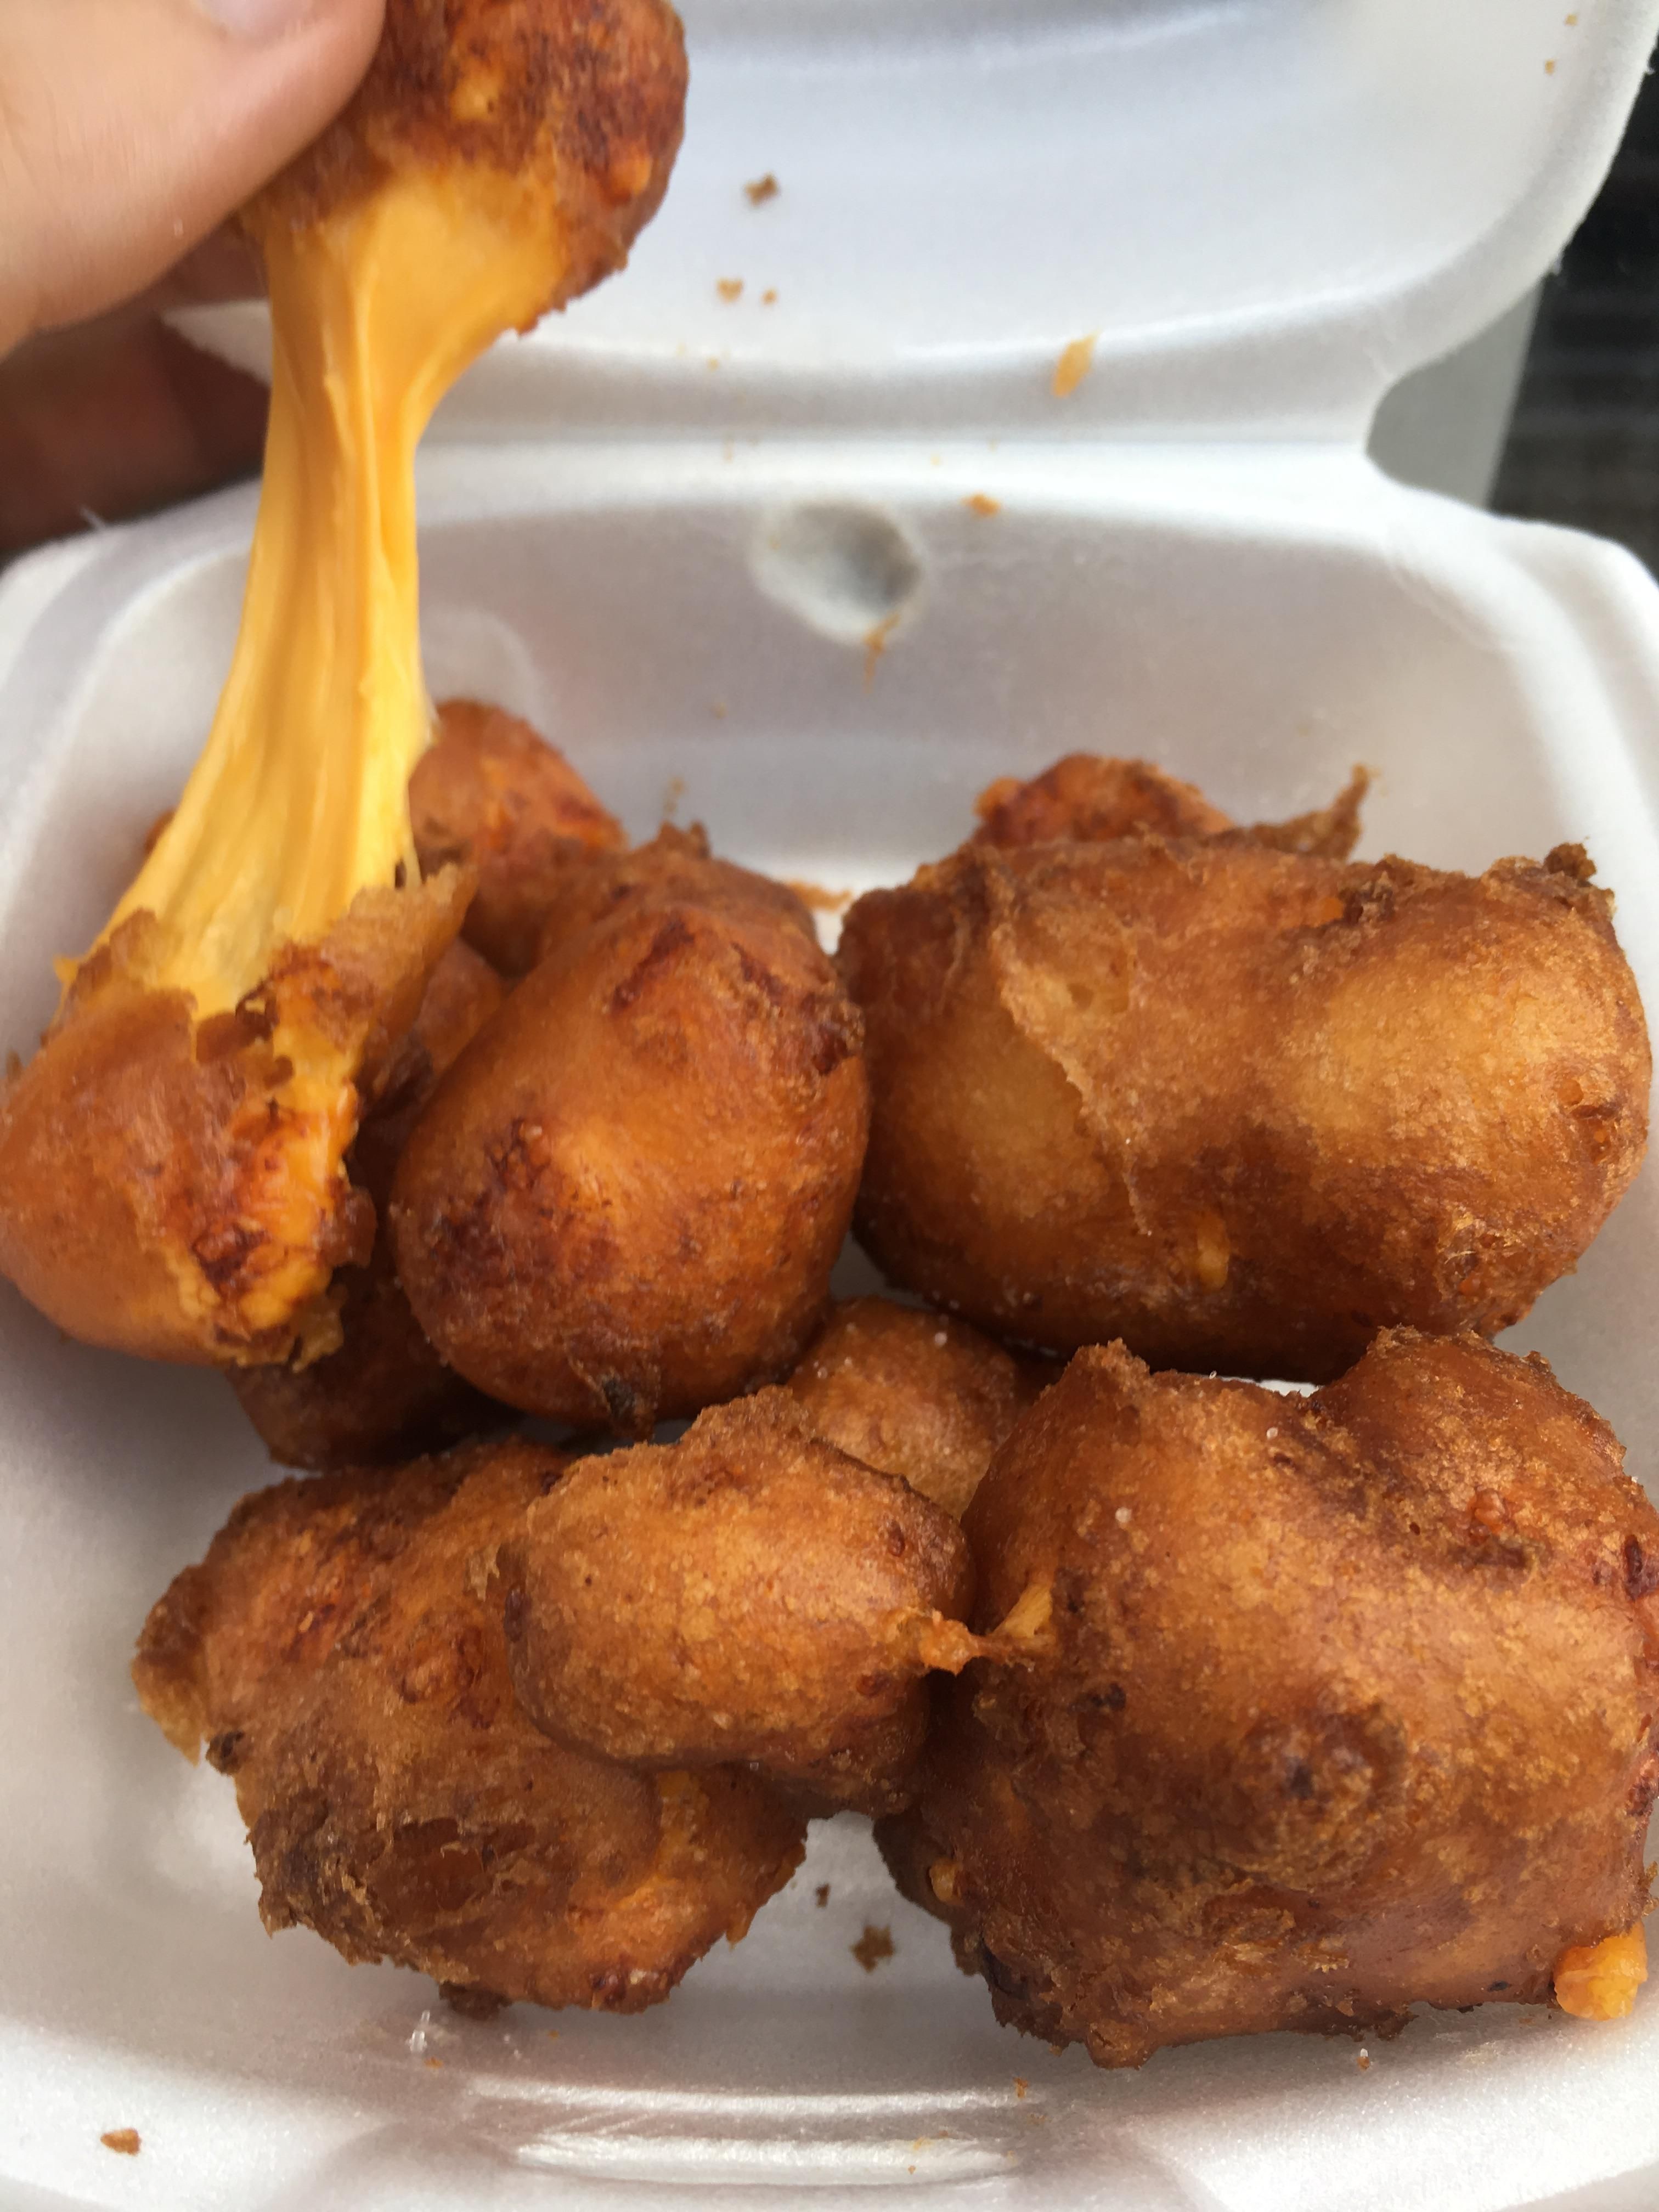 Cheese curds from Cheese Days in Monroe, WI